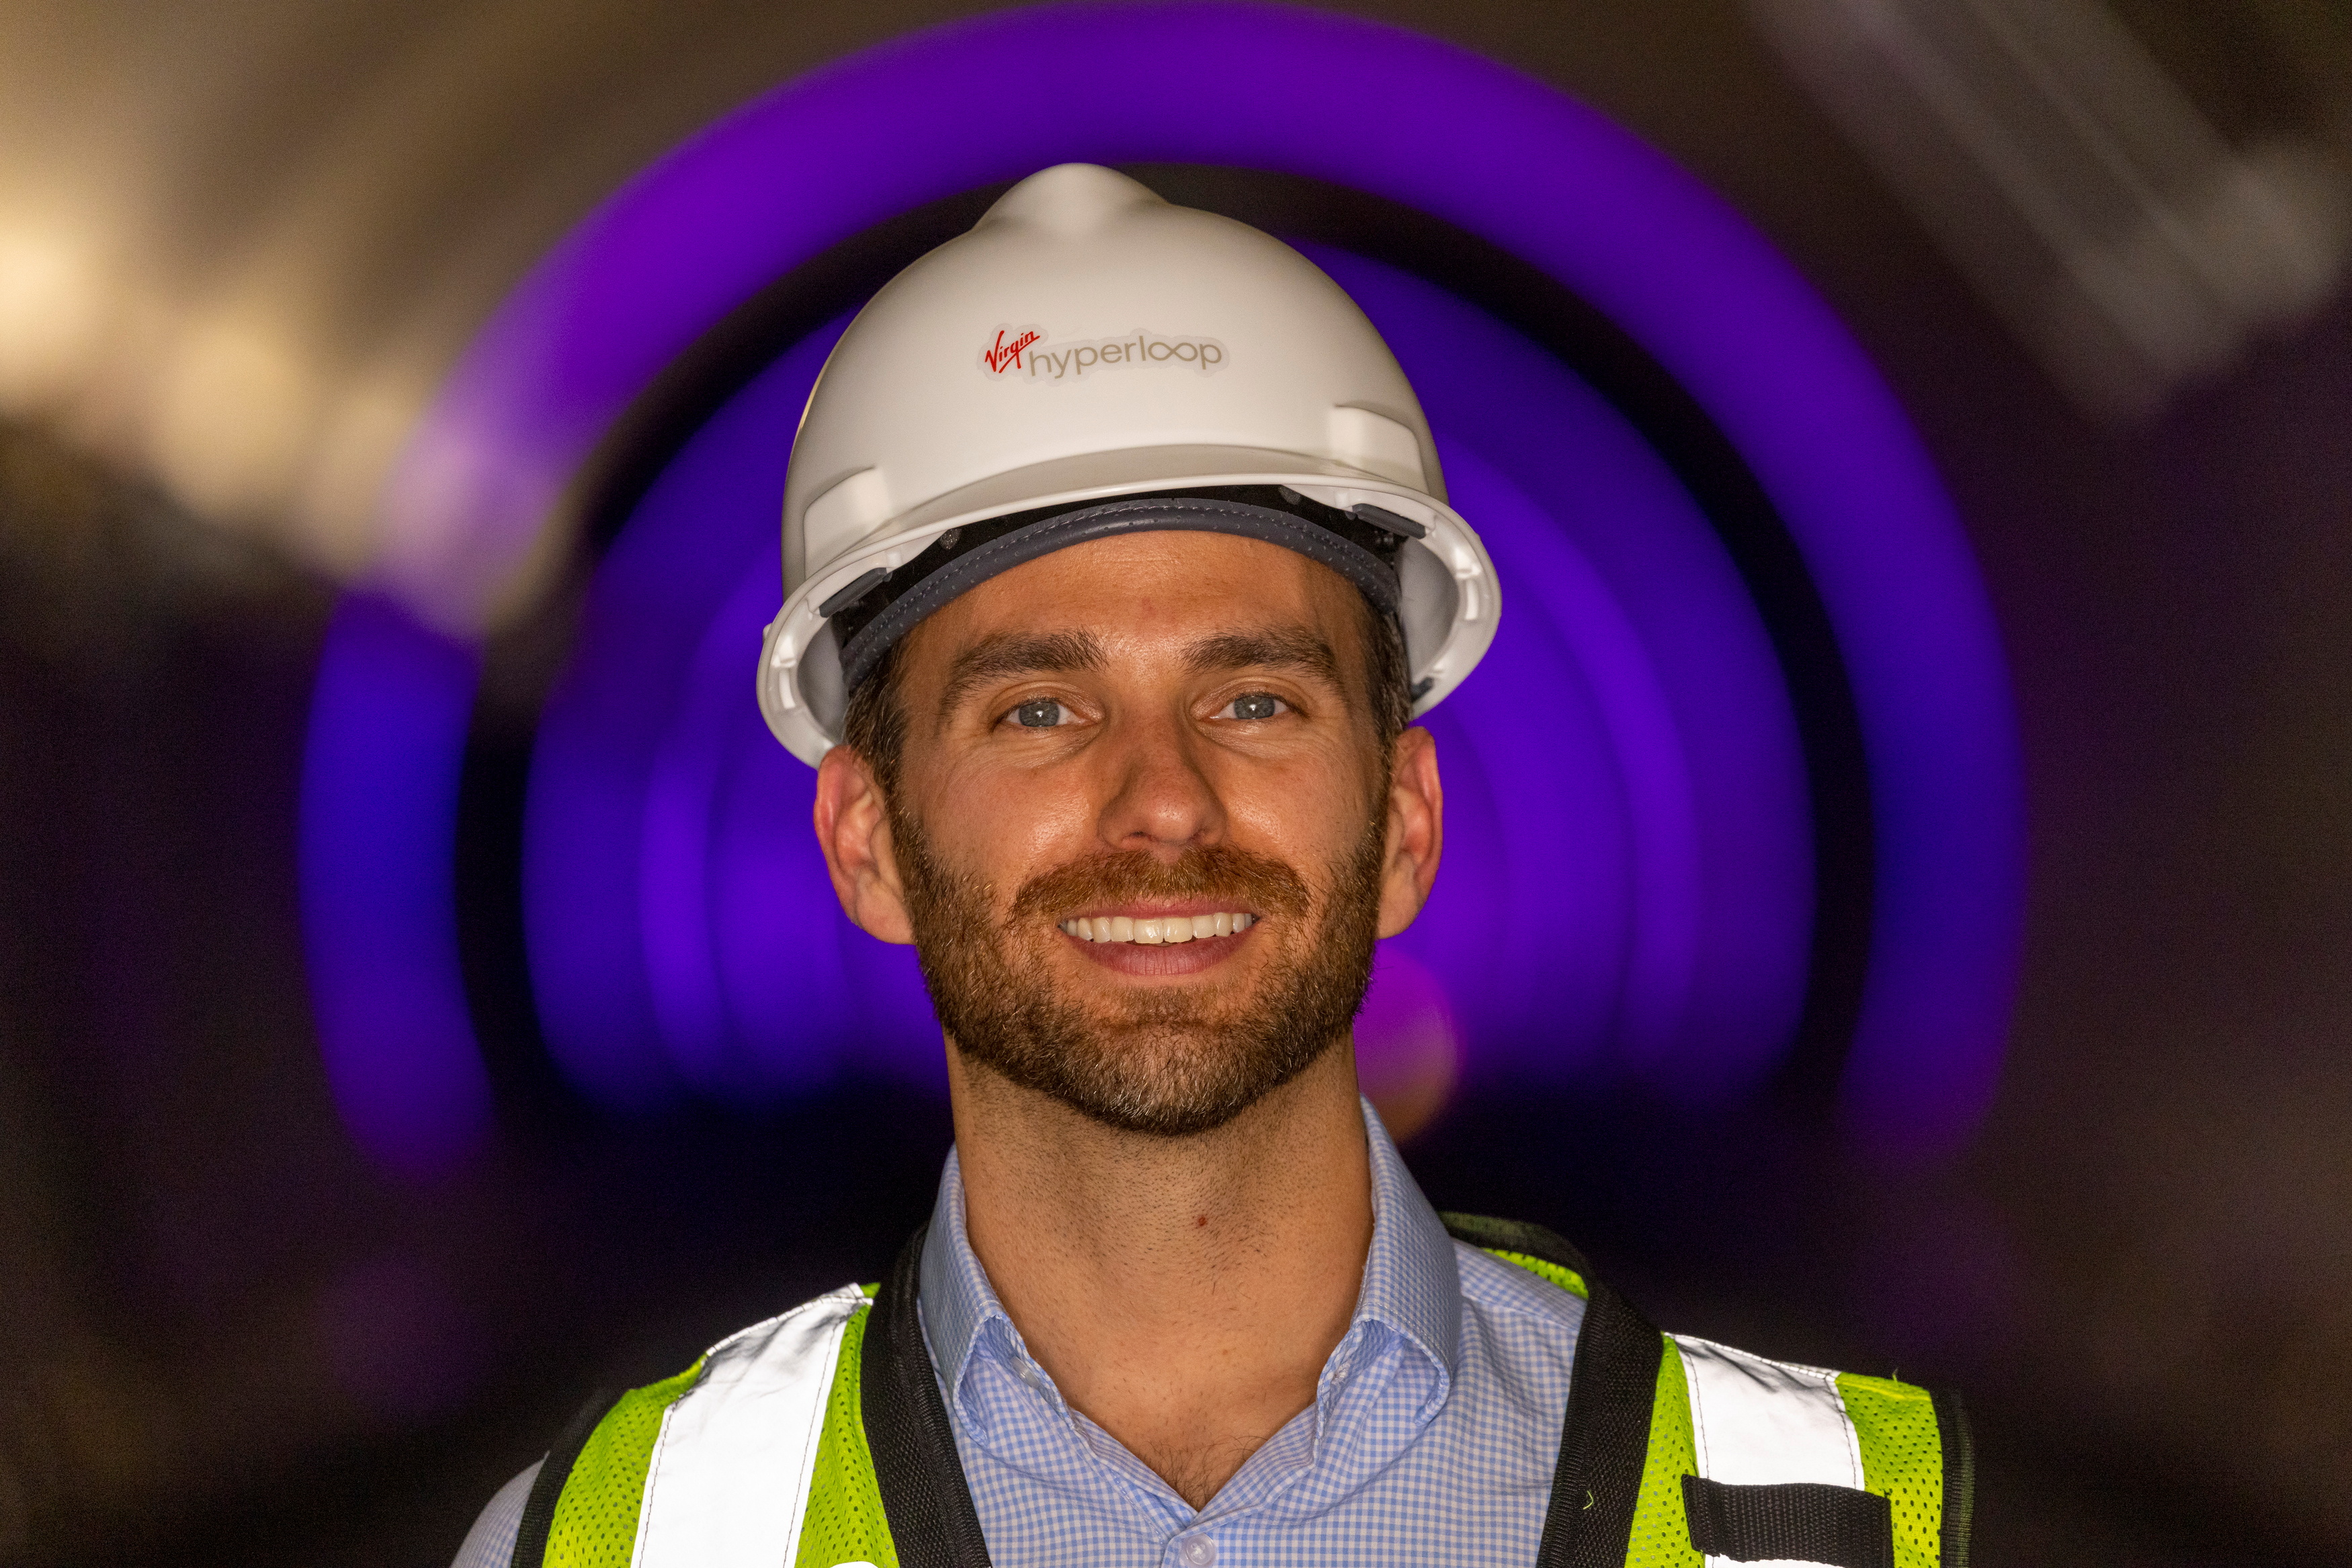 Josh Giegel, co-founder and CEO of Virgin Hyperloop, poses inside a hyperloop tube at the company's hyperloop facility near Las Vegas